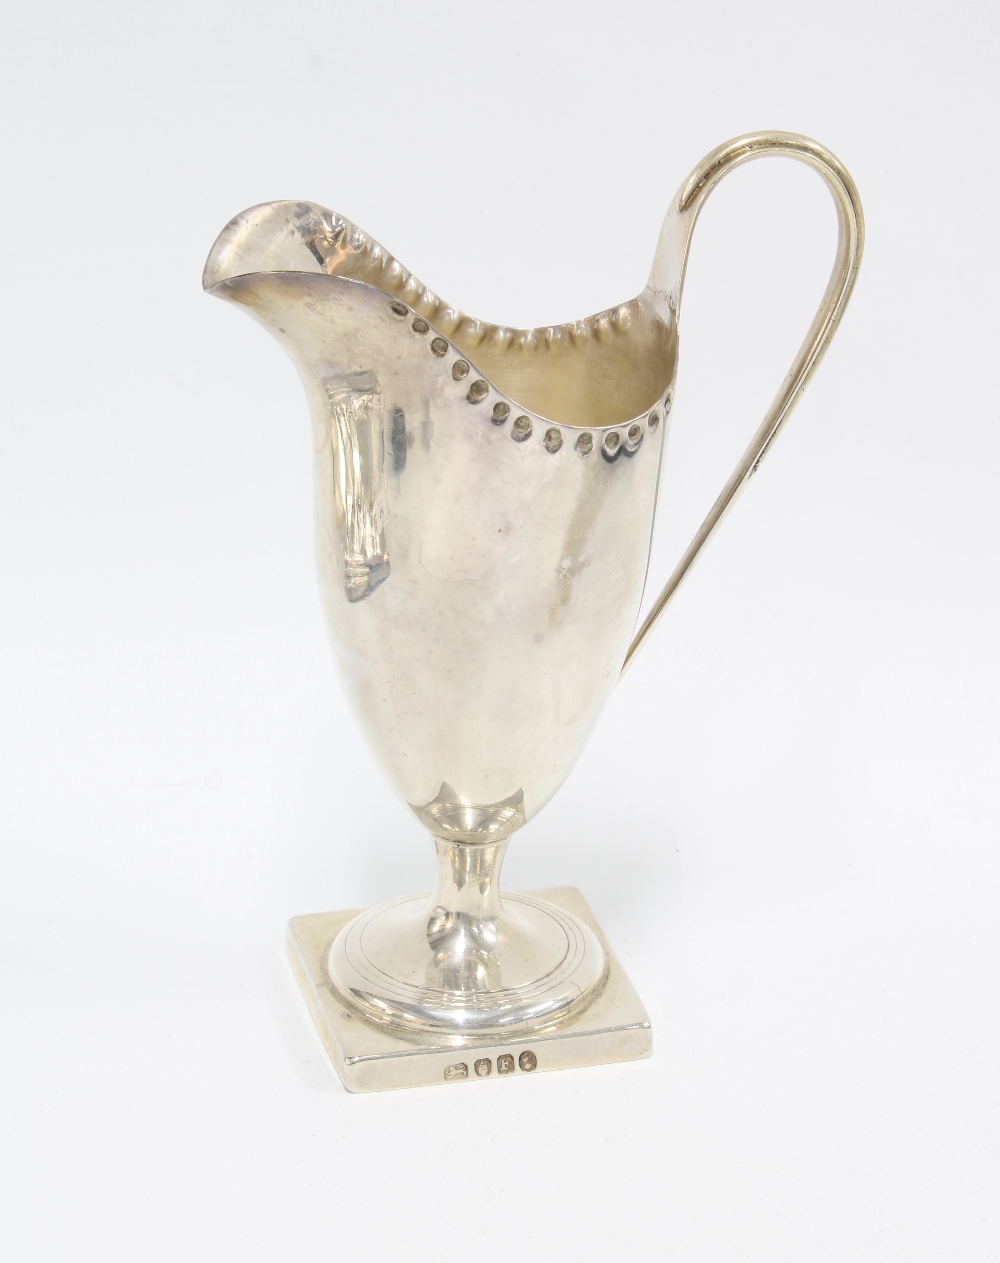 Georgian silver cream jug, London 1801, helmet form with punched ri and square footrim, 14cm